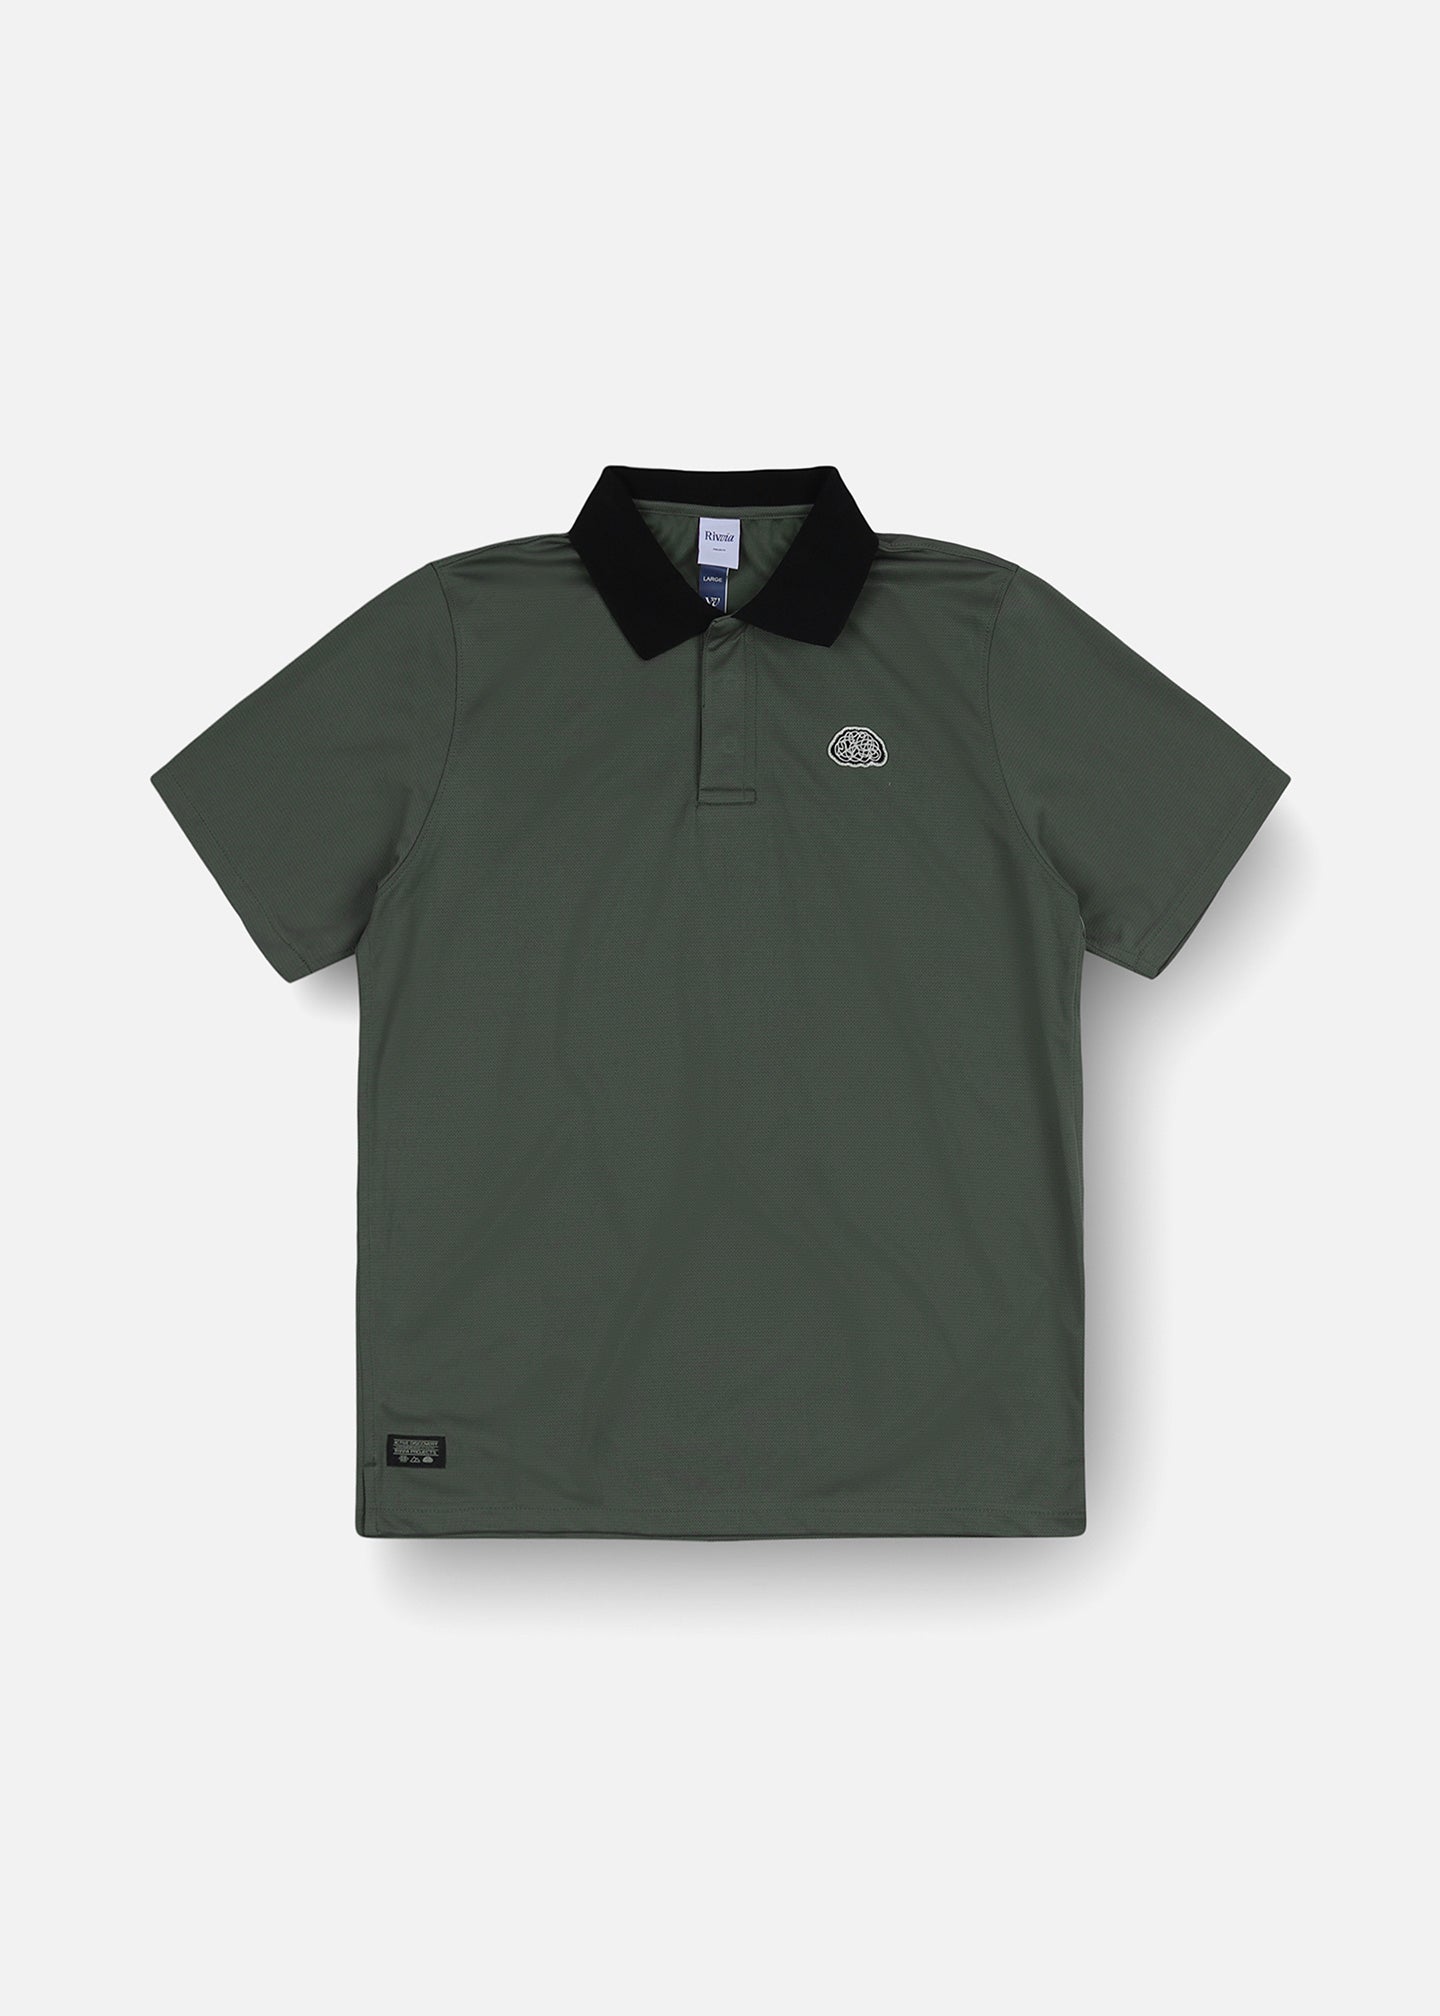 SCATTER BRAIN POLO : PINE